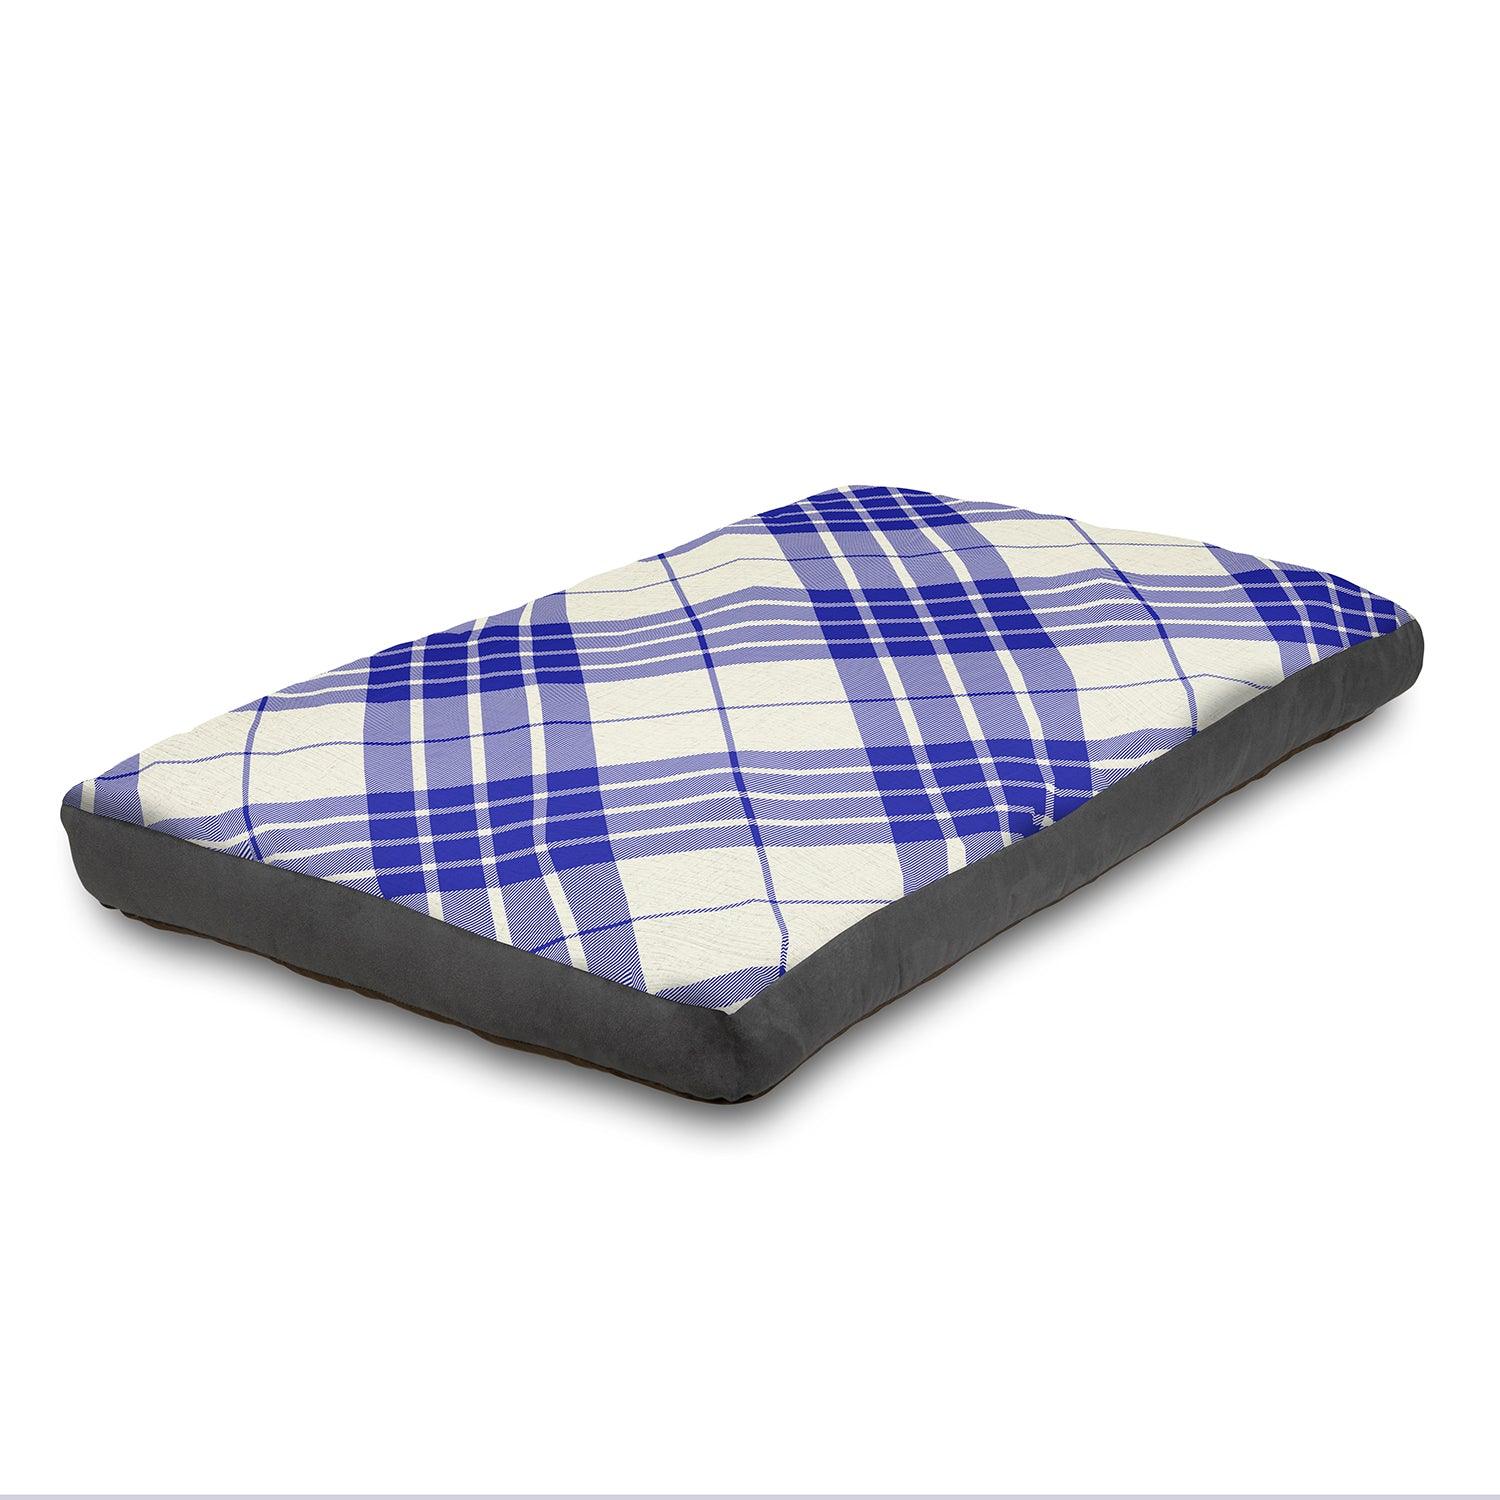 View Super Comfy Dog Bed Soft and Fluffy with Washable Cover Small 75 x 50 cm Blue information